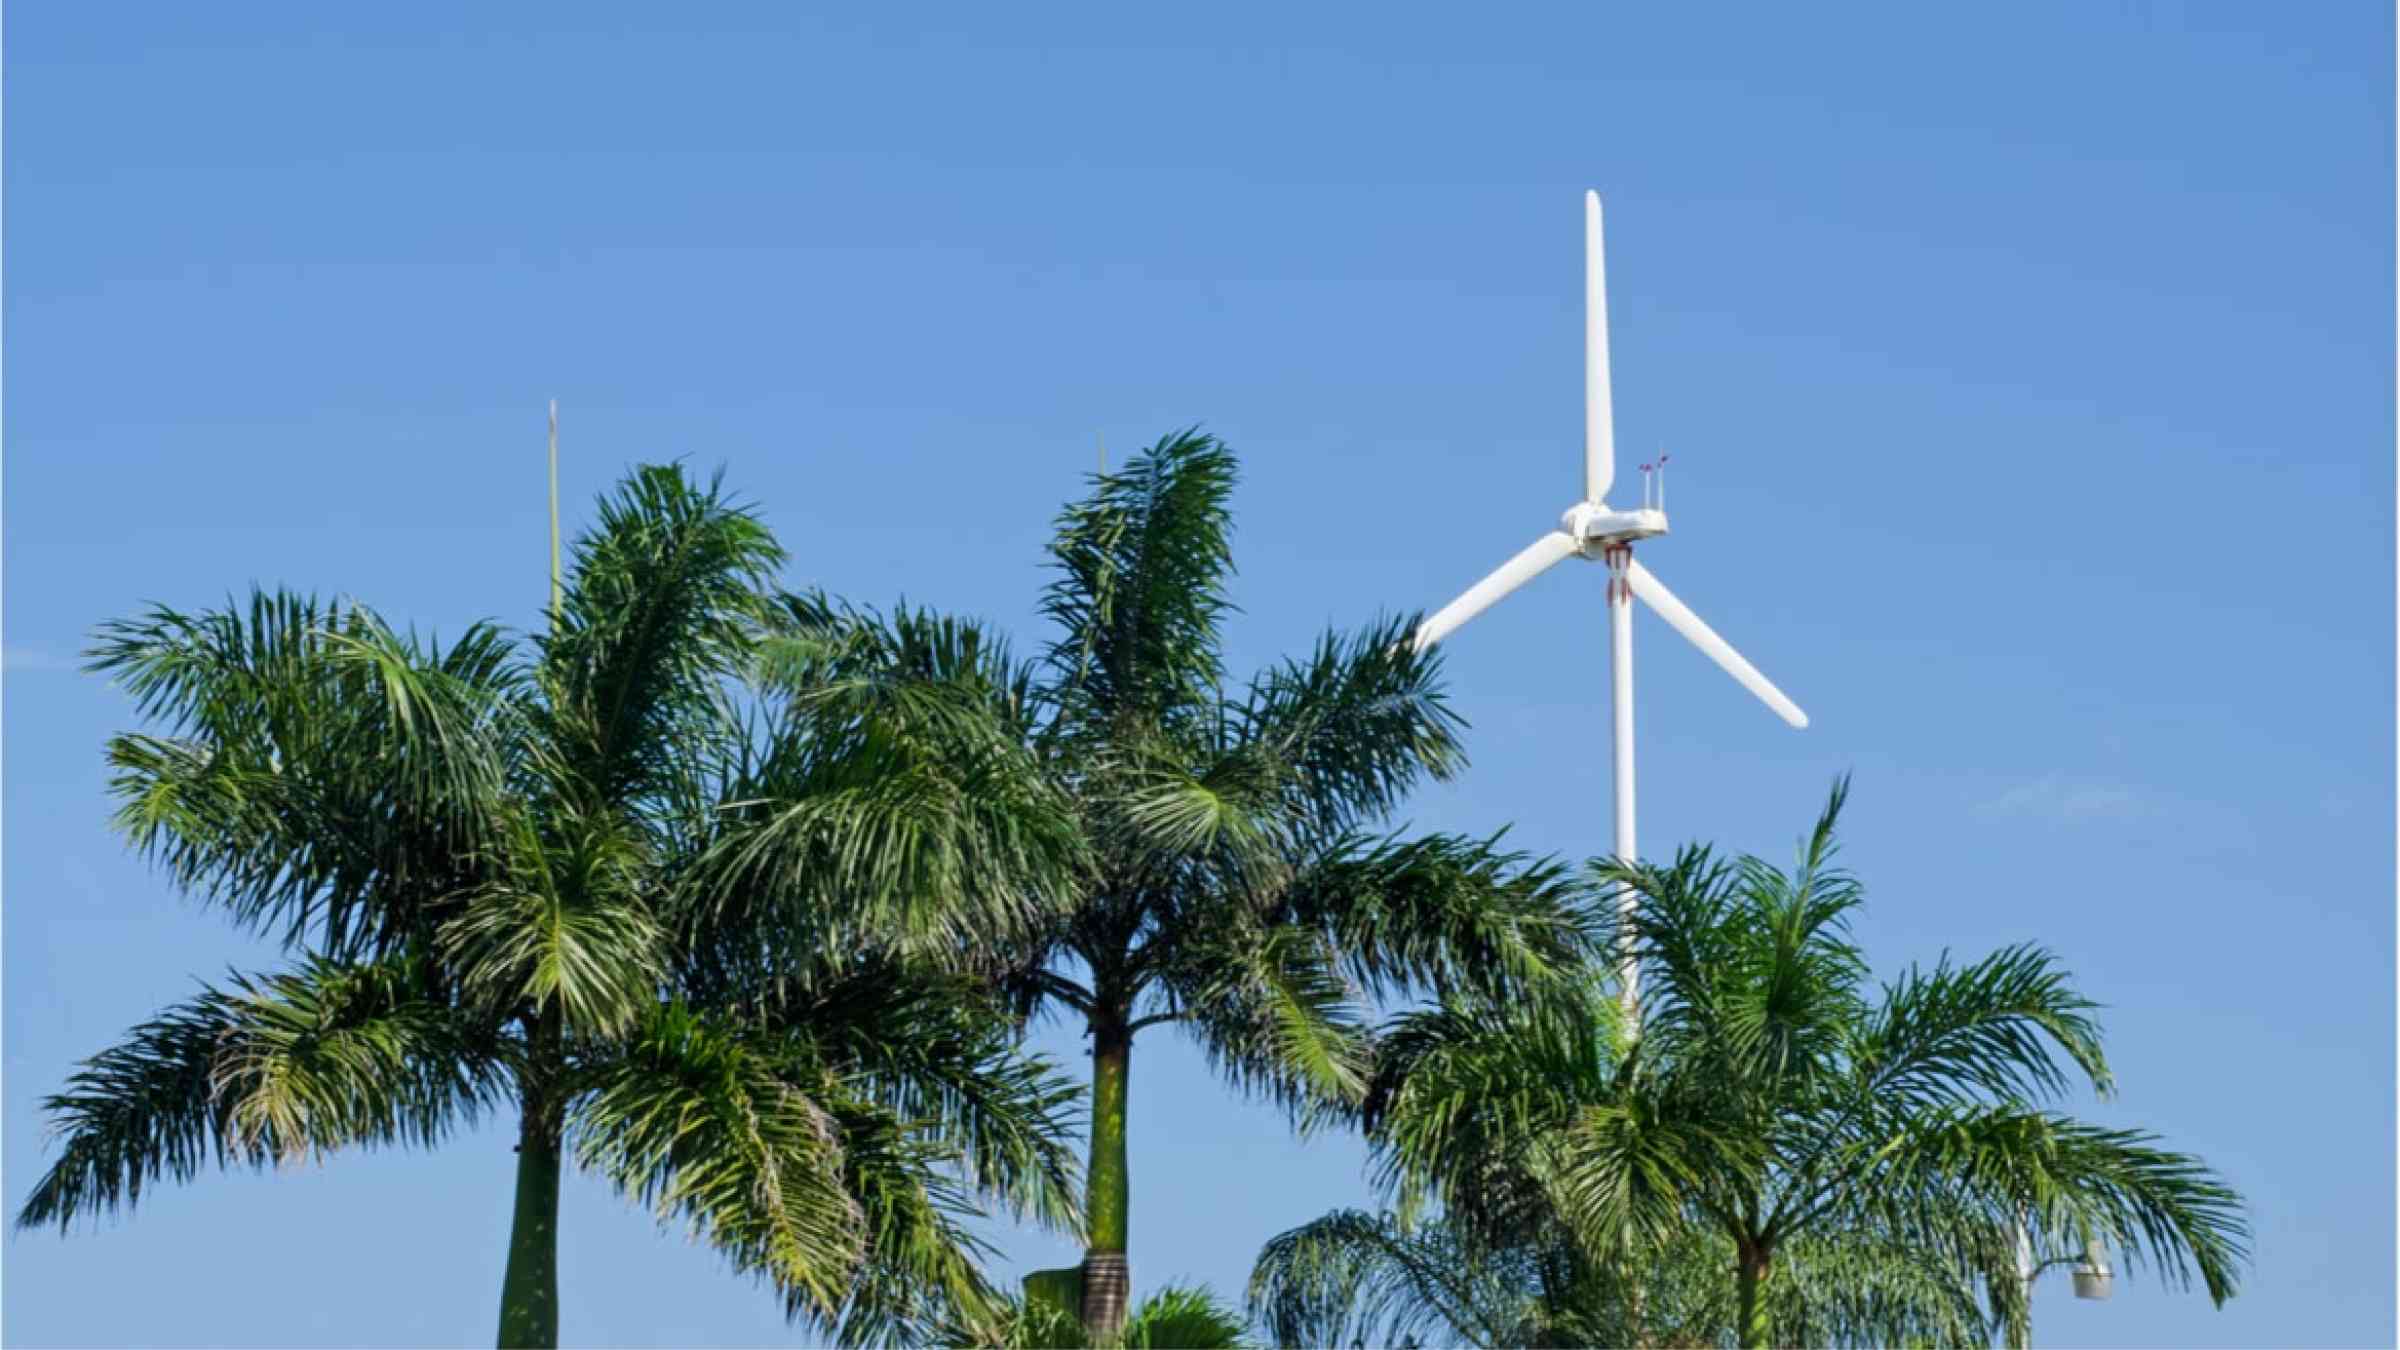 USA: Inspired by palm wind turbines | PreventionWeb